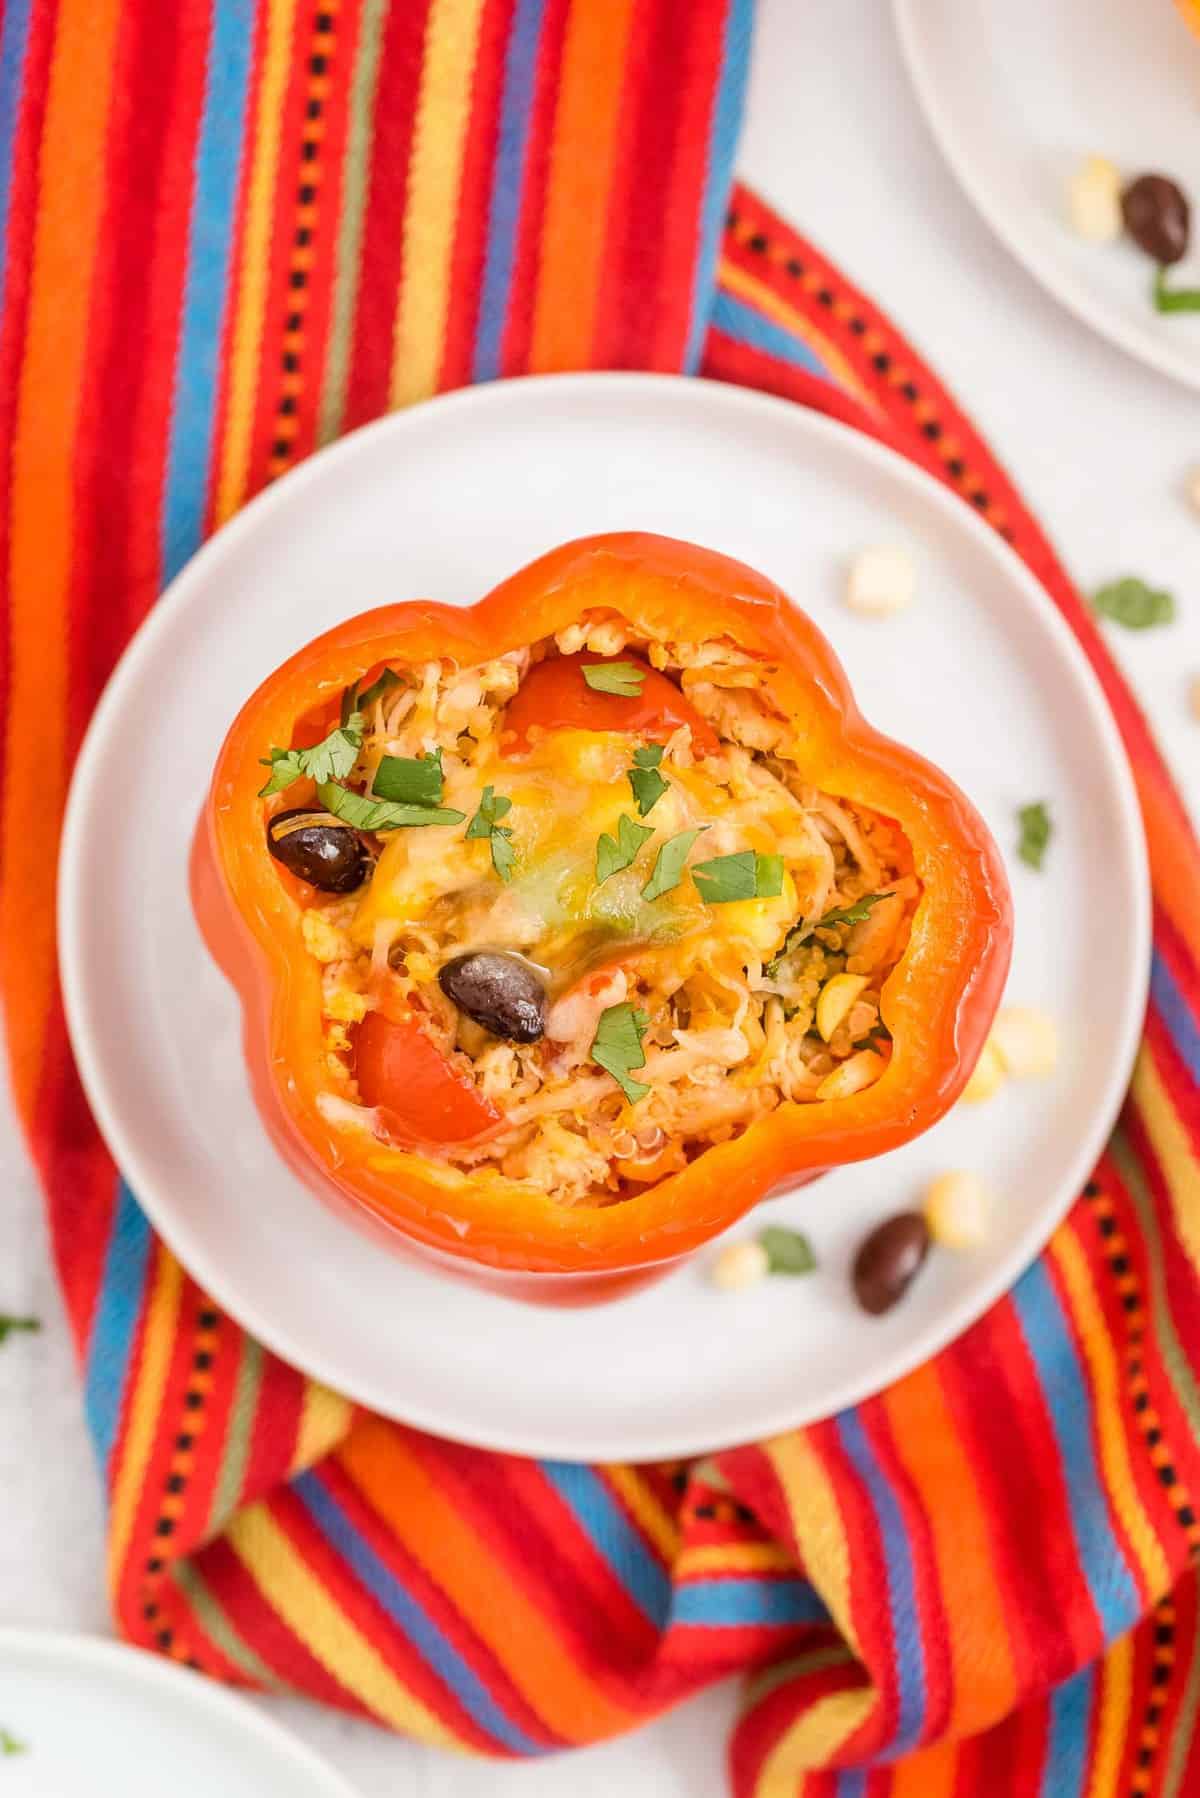 A stuffed pepper on a white plate on top of a colorful linen.